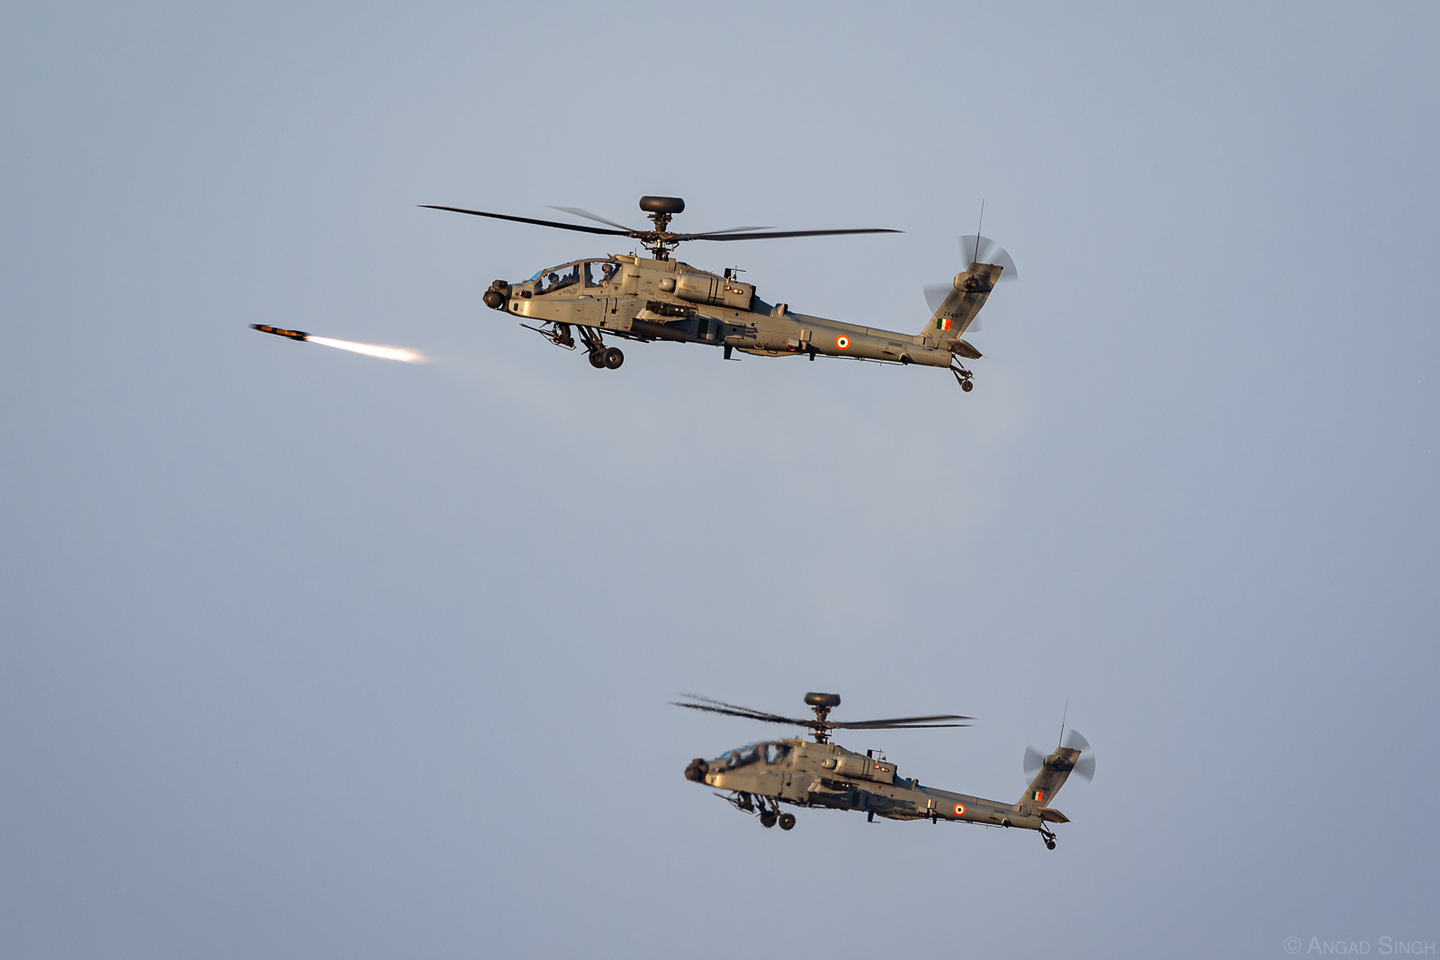 The lead of this pair of AH-64E(I) Apaches fires an AGM-114 Hellfire anti-tank missile. <em>Angad Singh</em>